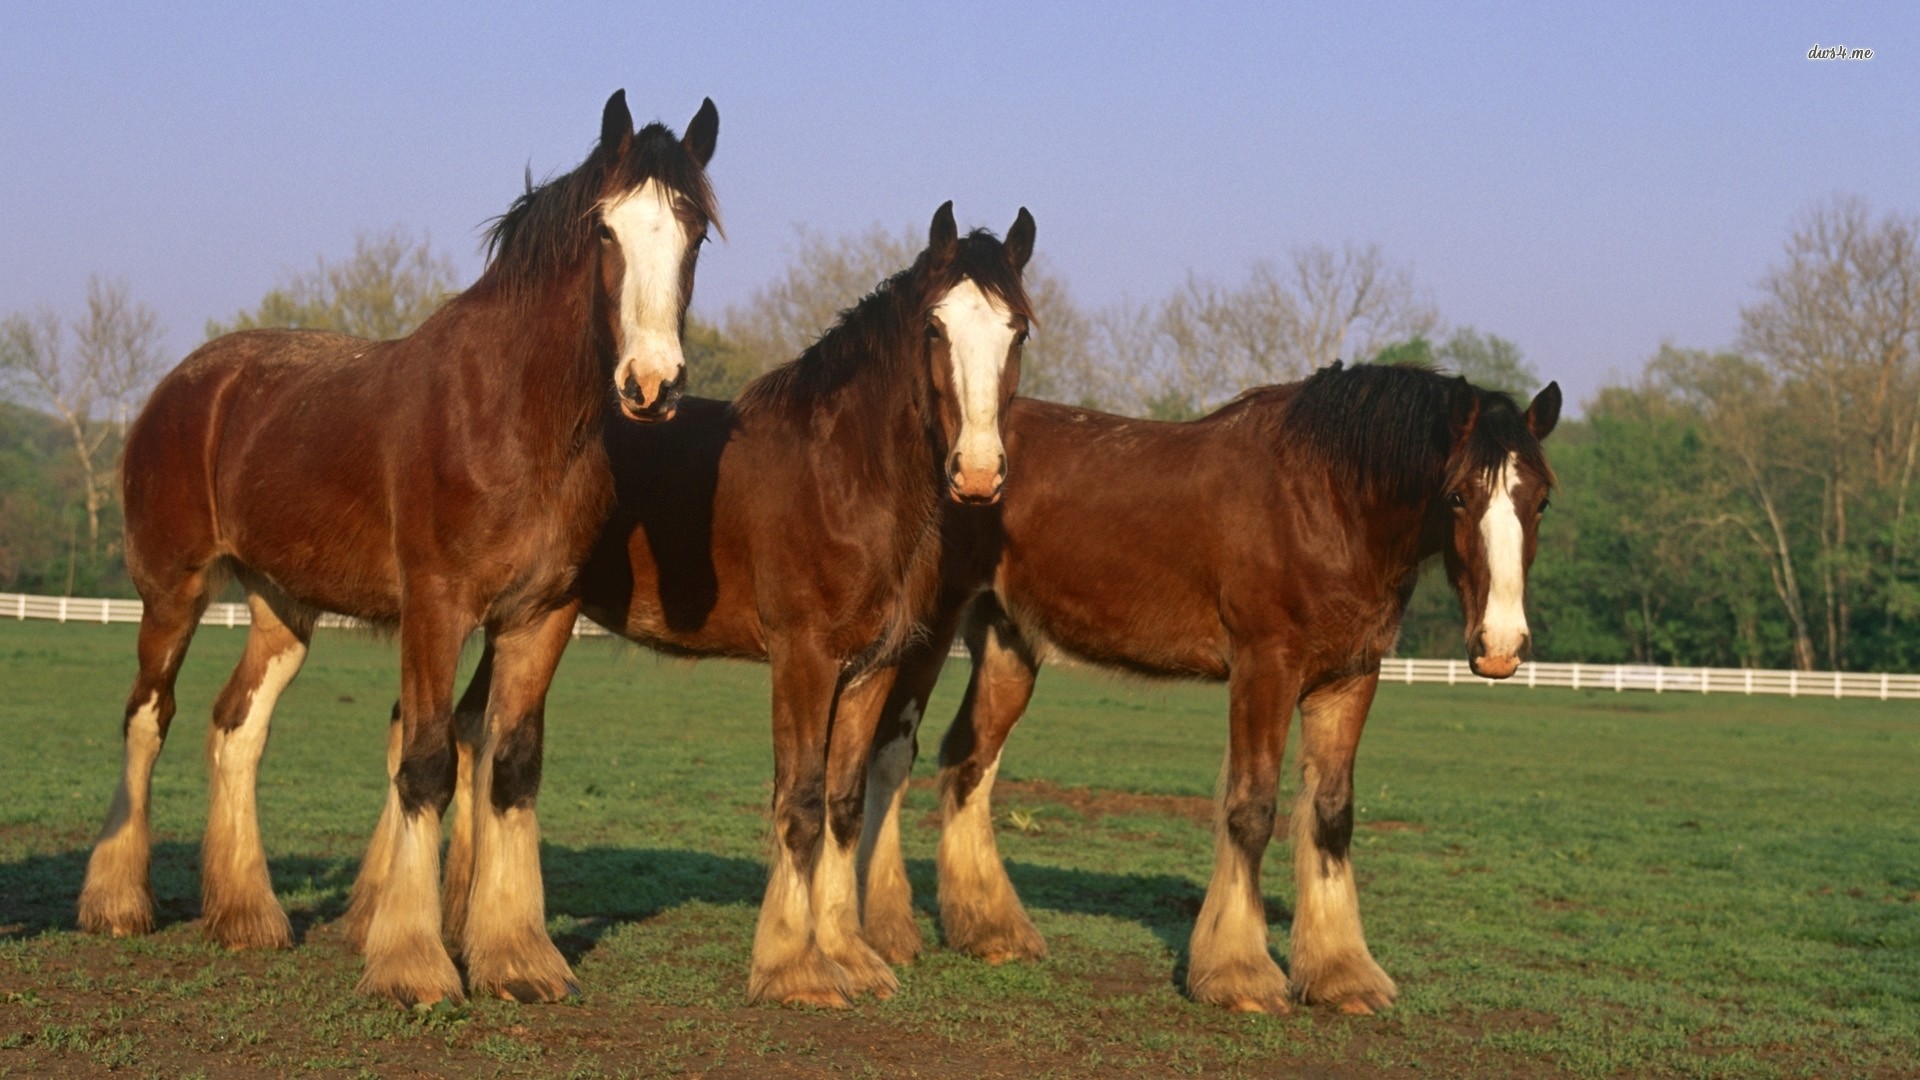 1920x1080 ... Clydesdale horses wallpaper  ...